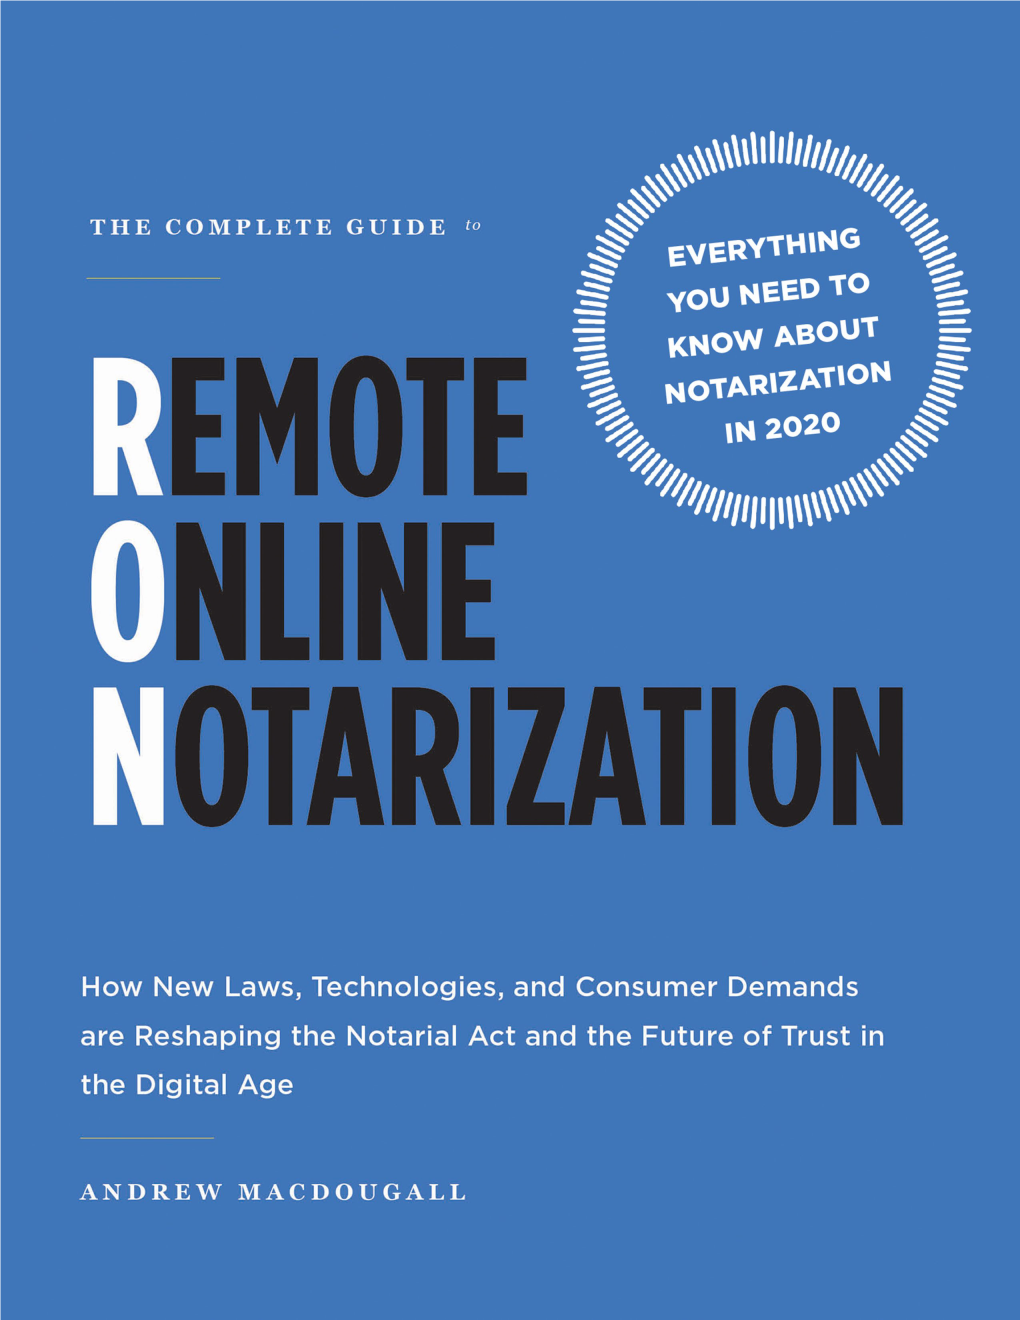 The Complete Guide to Remote Online Notarization the COMPLETE GUIDE to REMOTE ONLINE NOTARIZATION